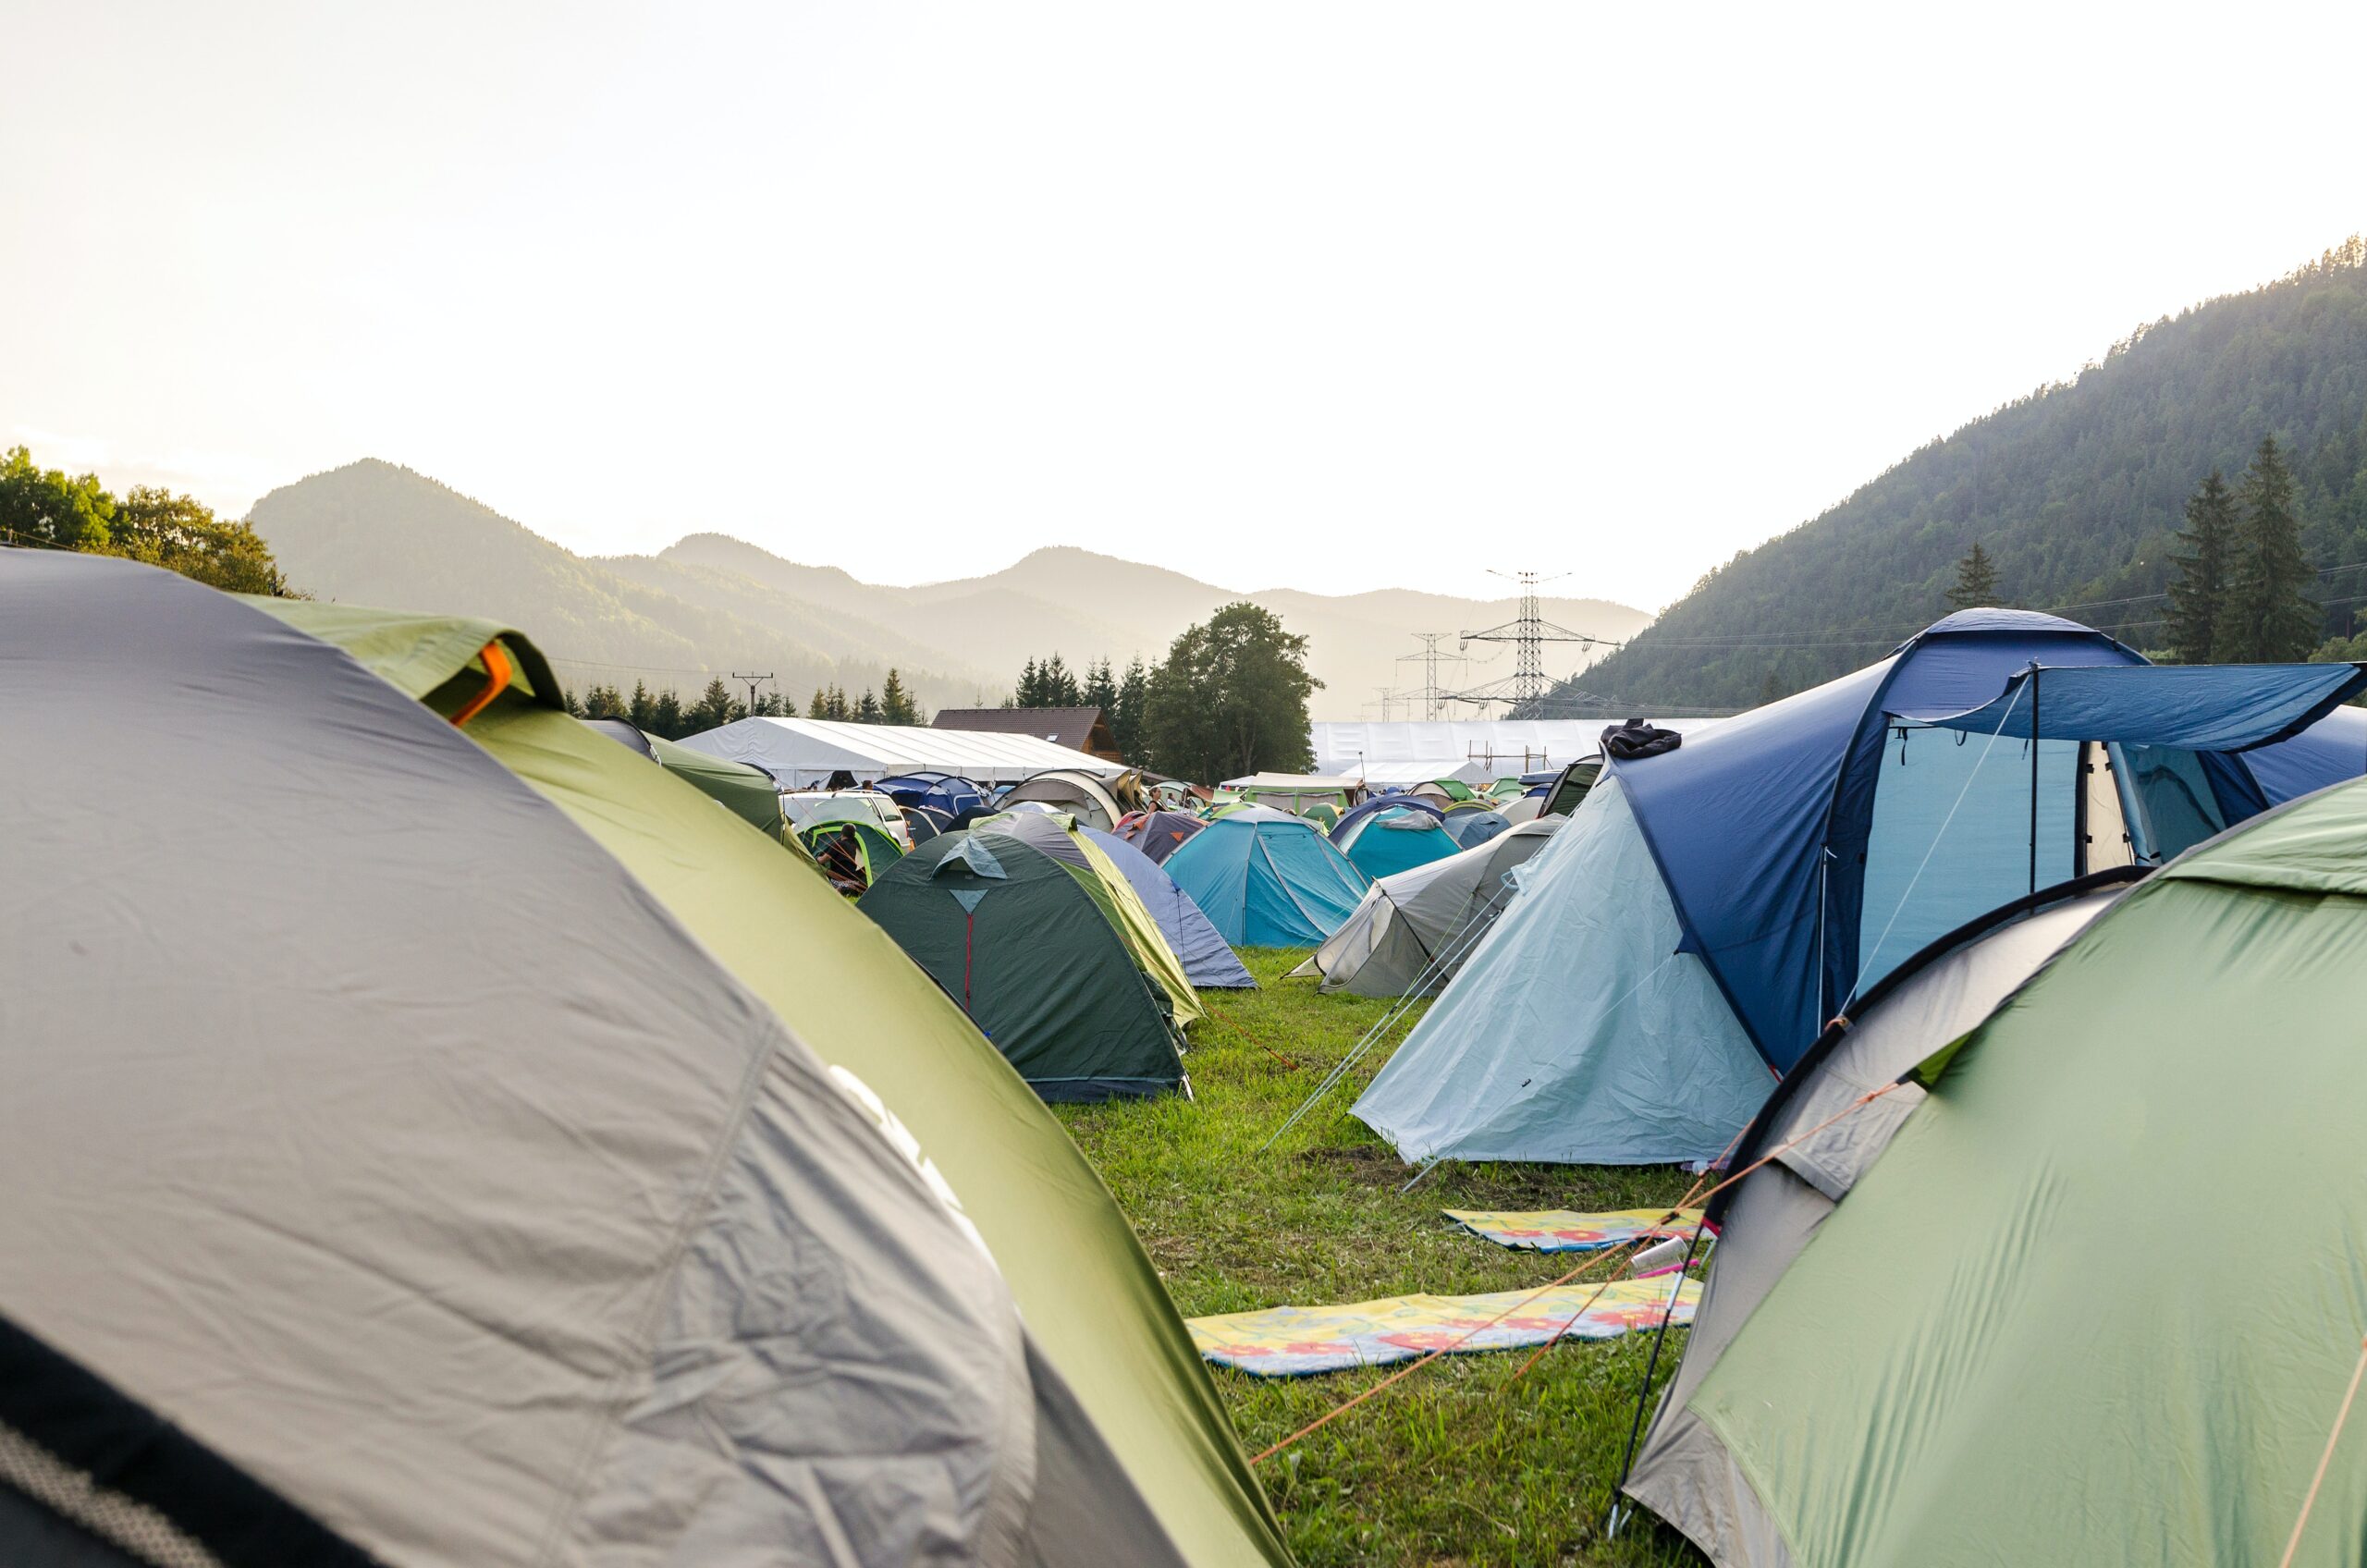 Pop Up Tent or Regular Tent? (11 Tips to Pick The Best Tent For Your Needs)